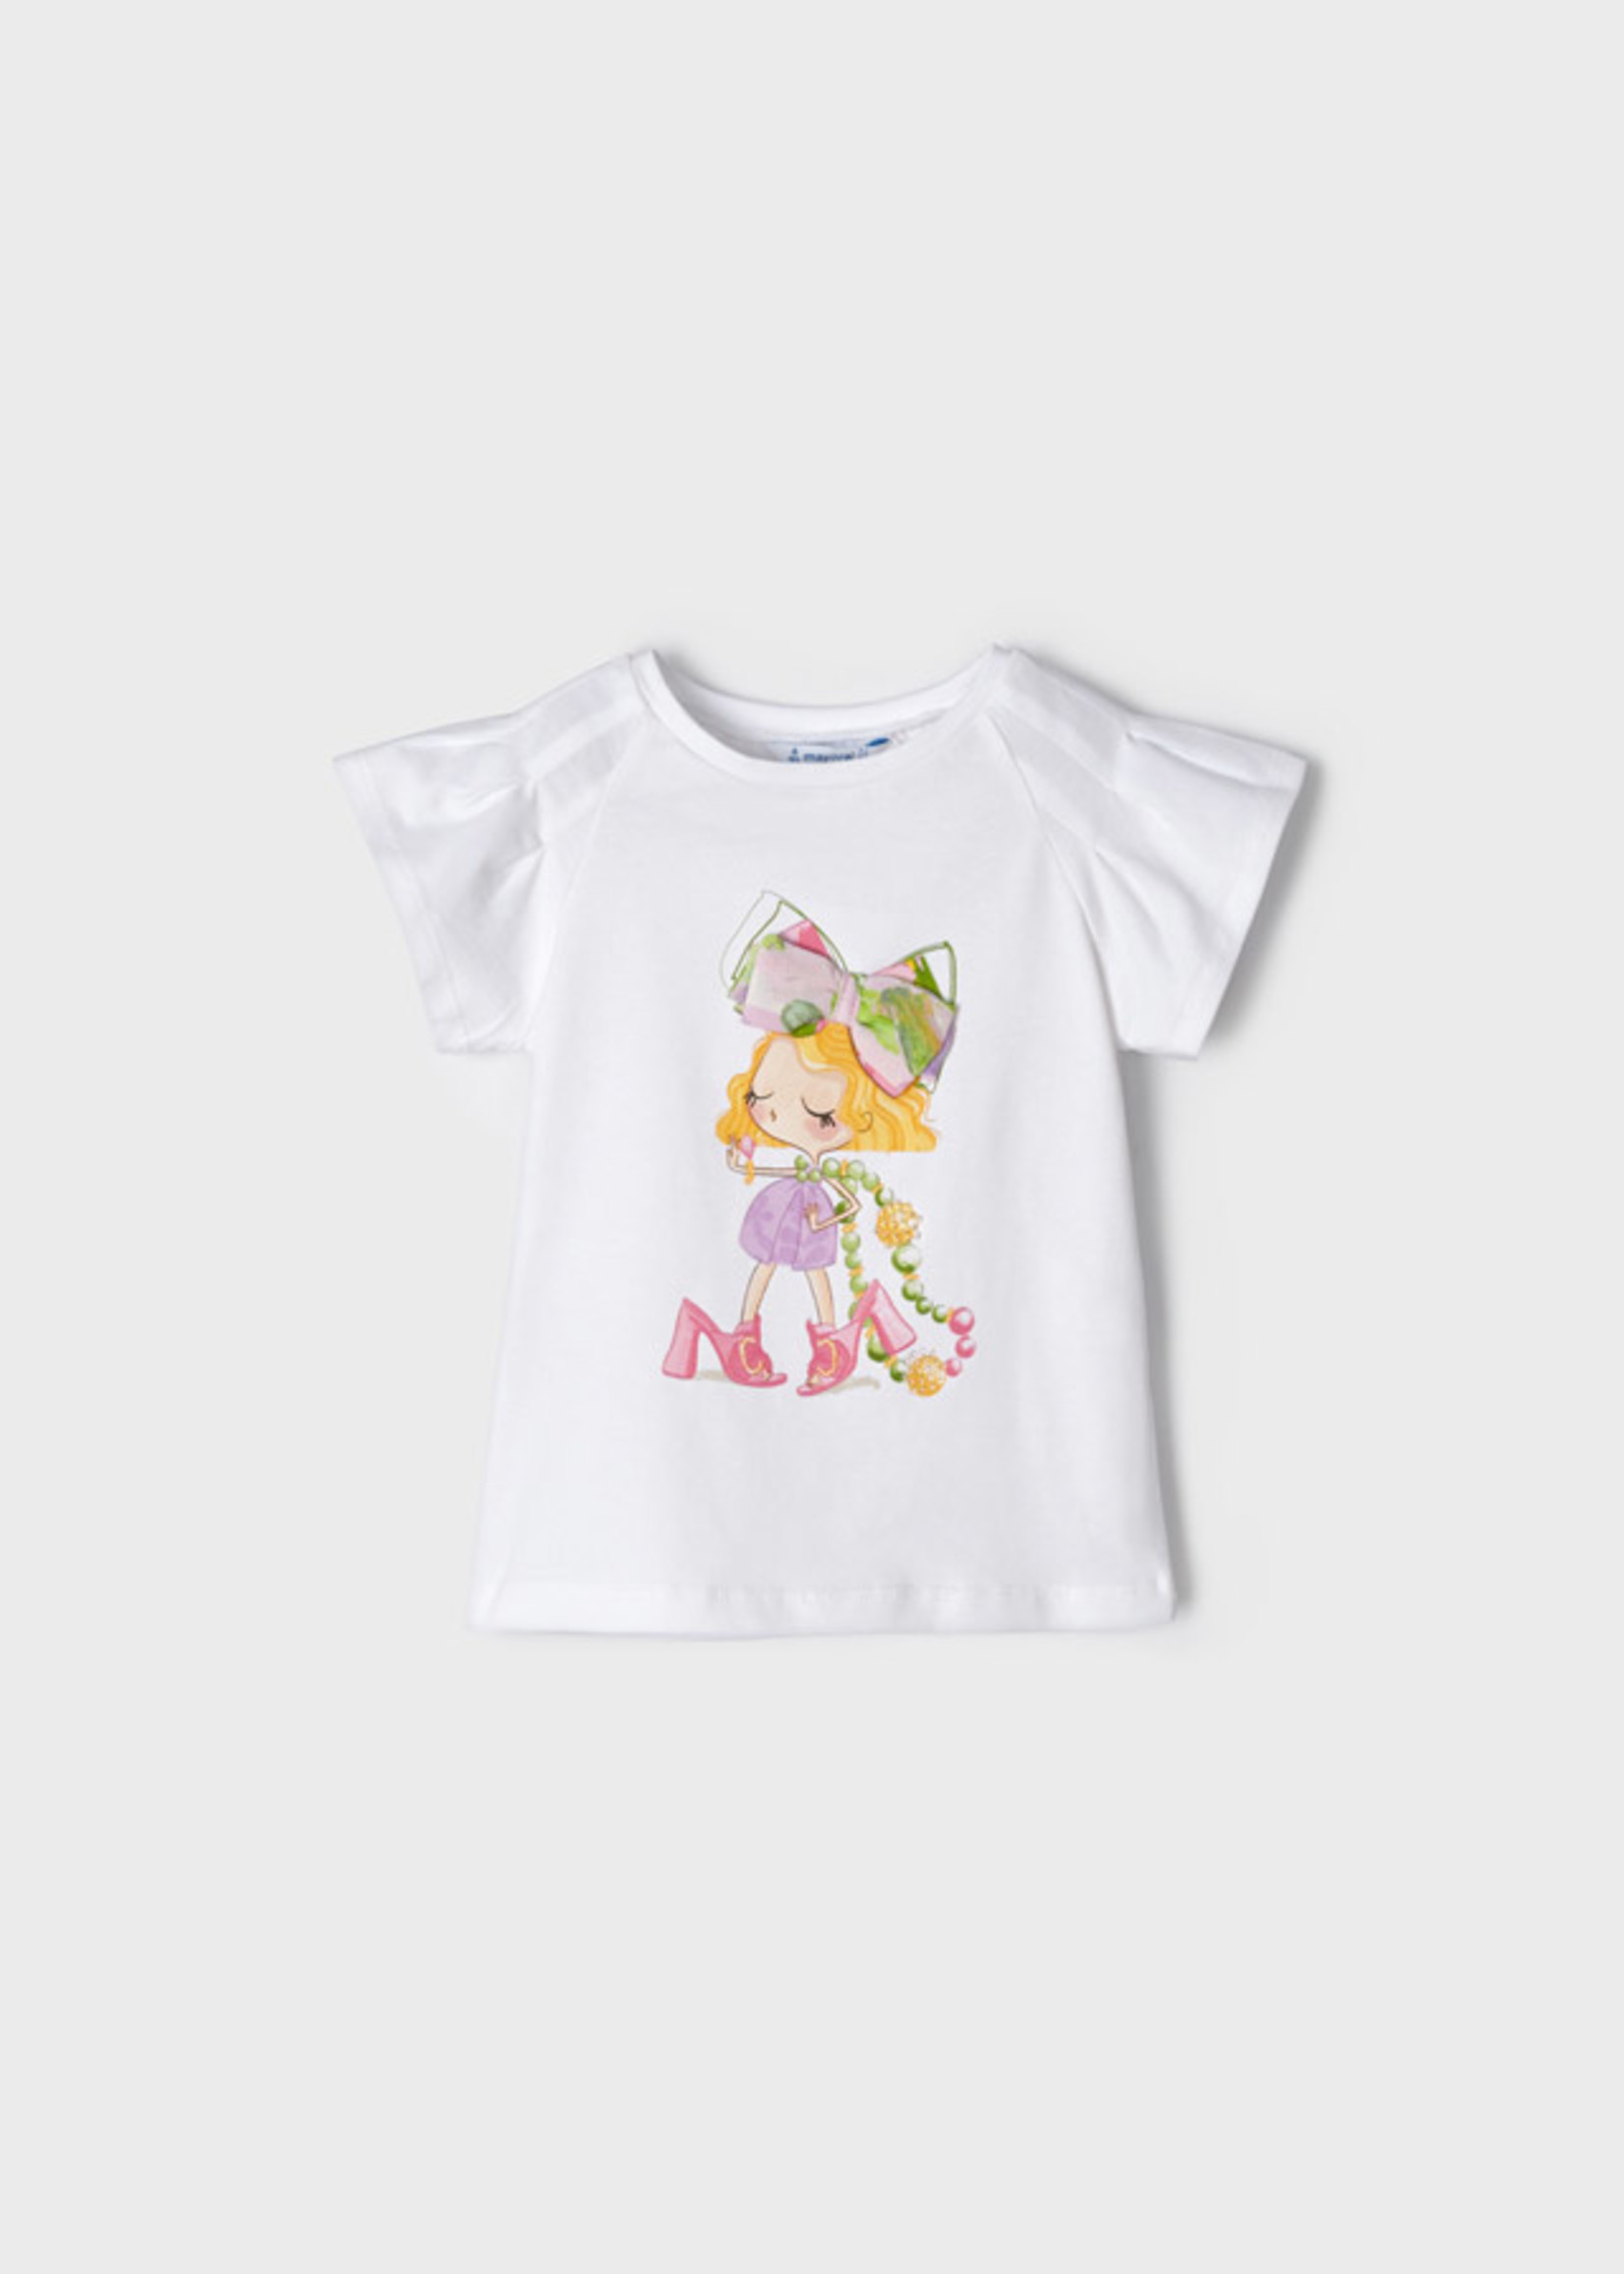 Mayoral S/s doll t-shirt              Lilac      3029